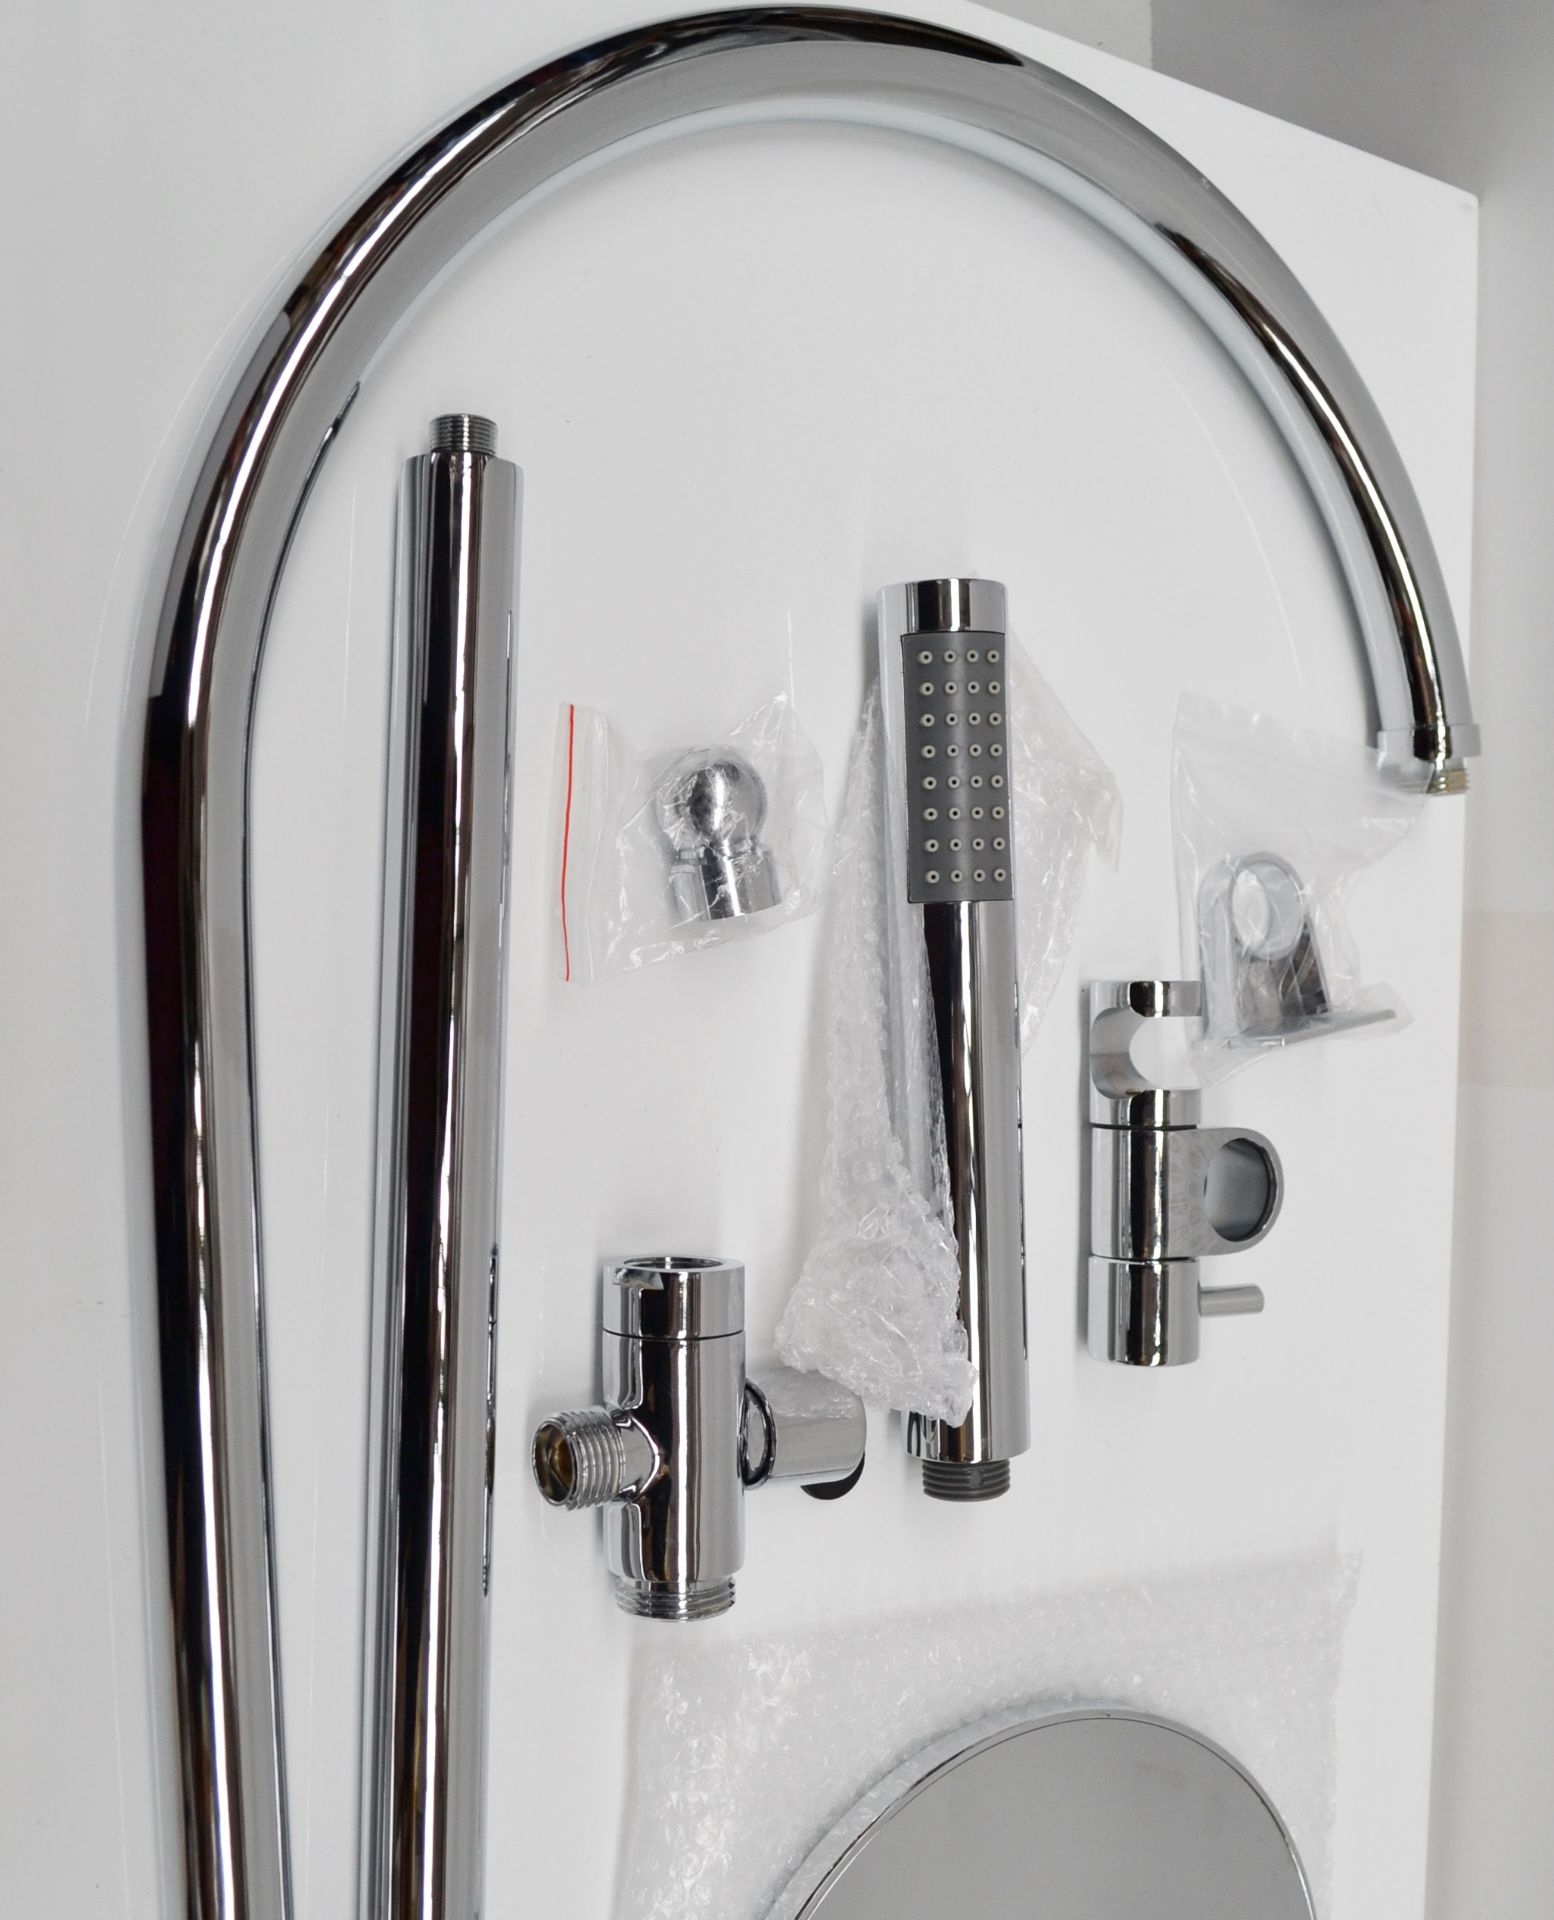 1 x ZEPHYR Shower Kit with Round Head and Minimalist Handset - Chrome - Ref: MBI004 - CL190 - H116 x - Image 4 of 7